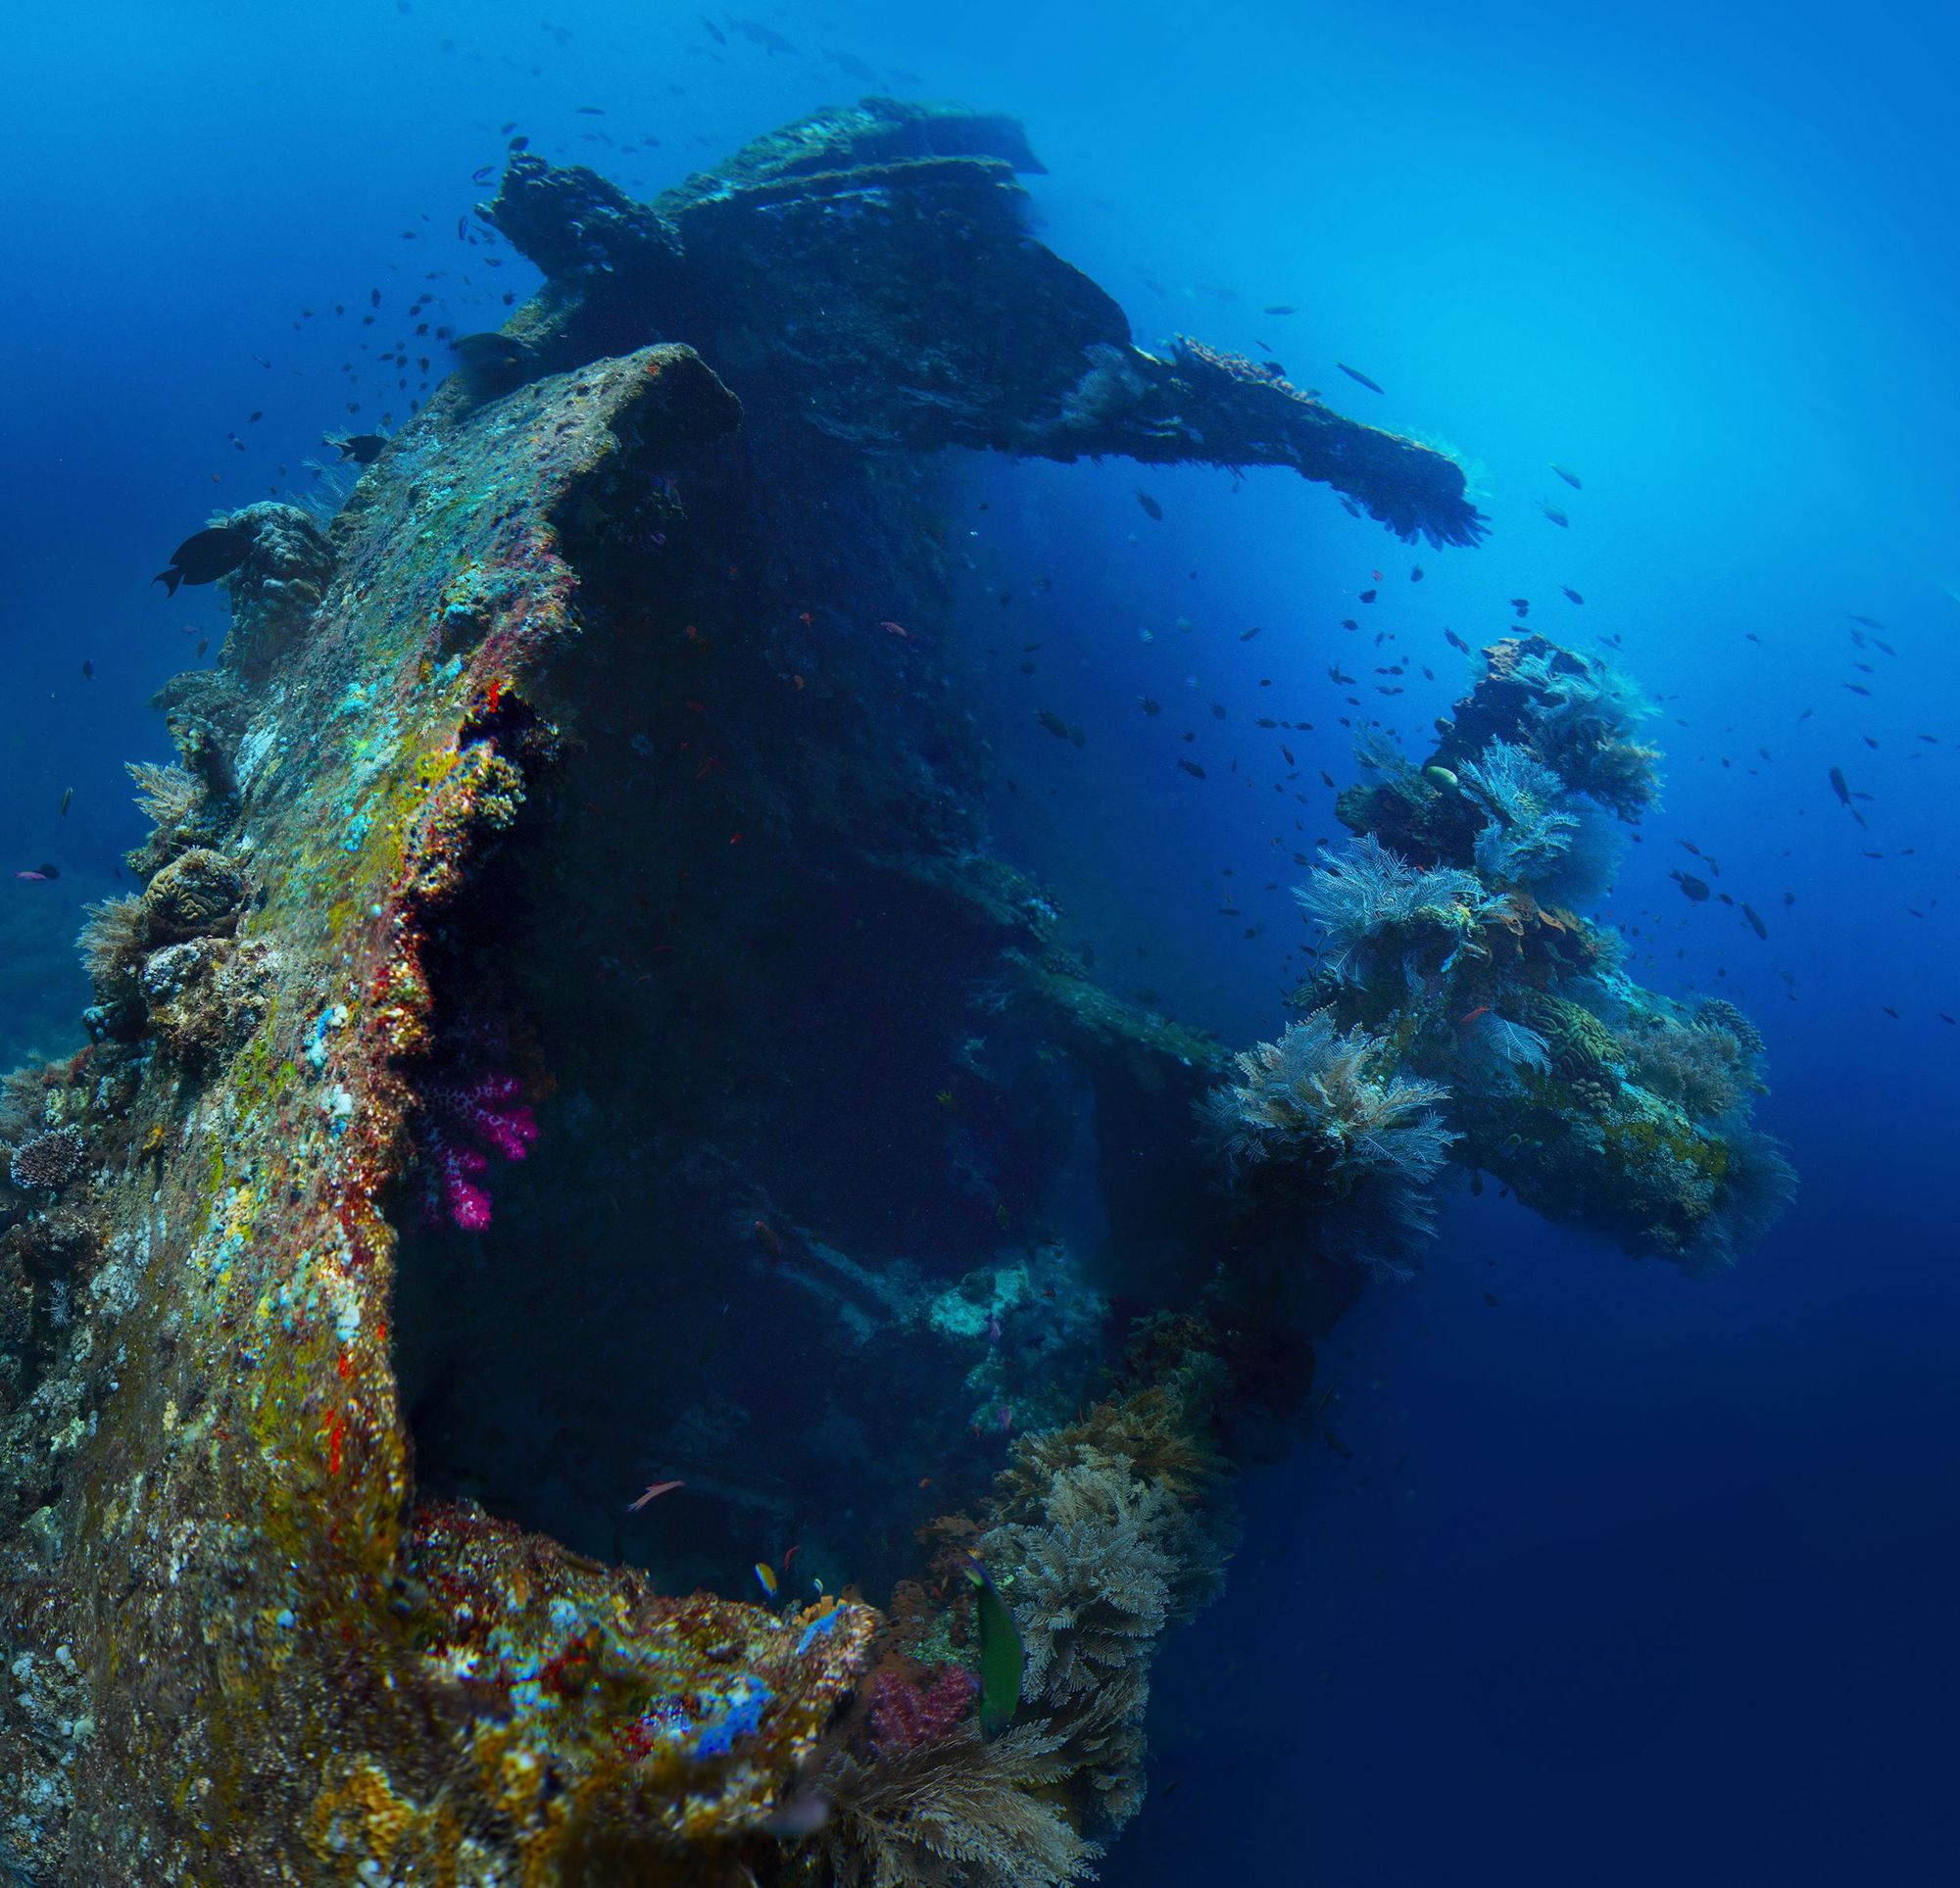 The USAT Liberty wreck in the waters beneath Tulamben, on Bali. Photo: Getty